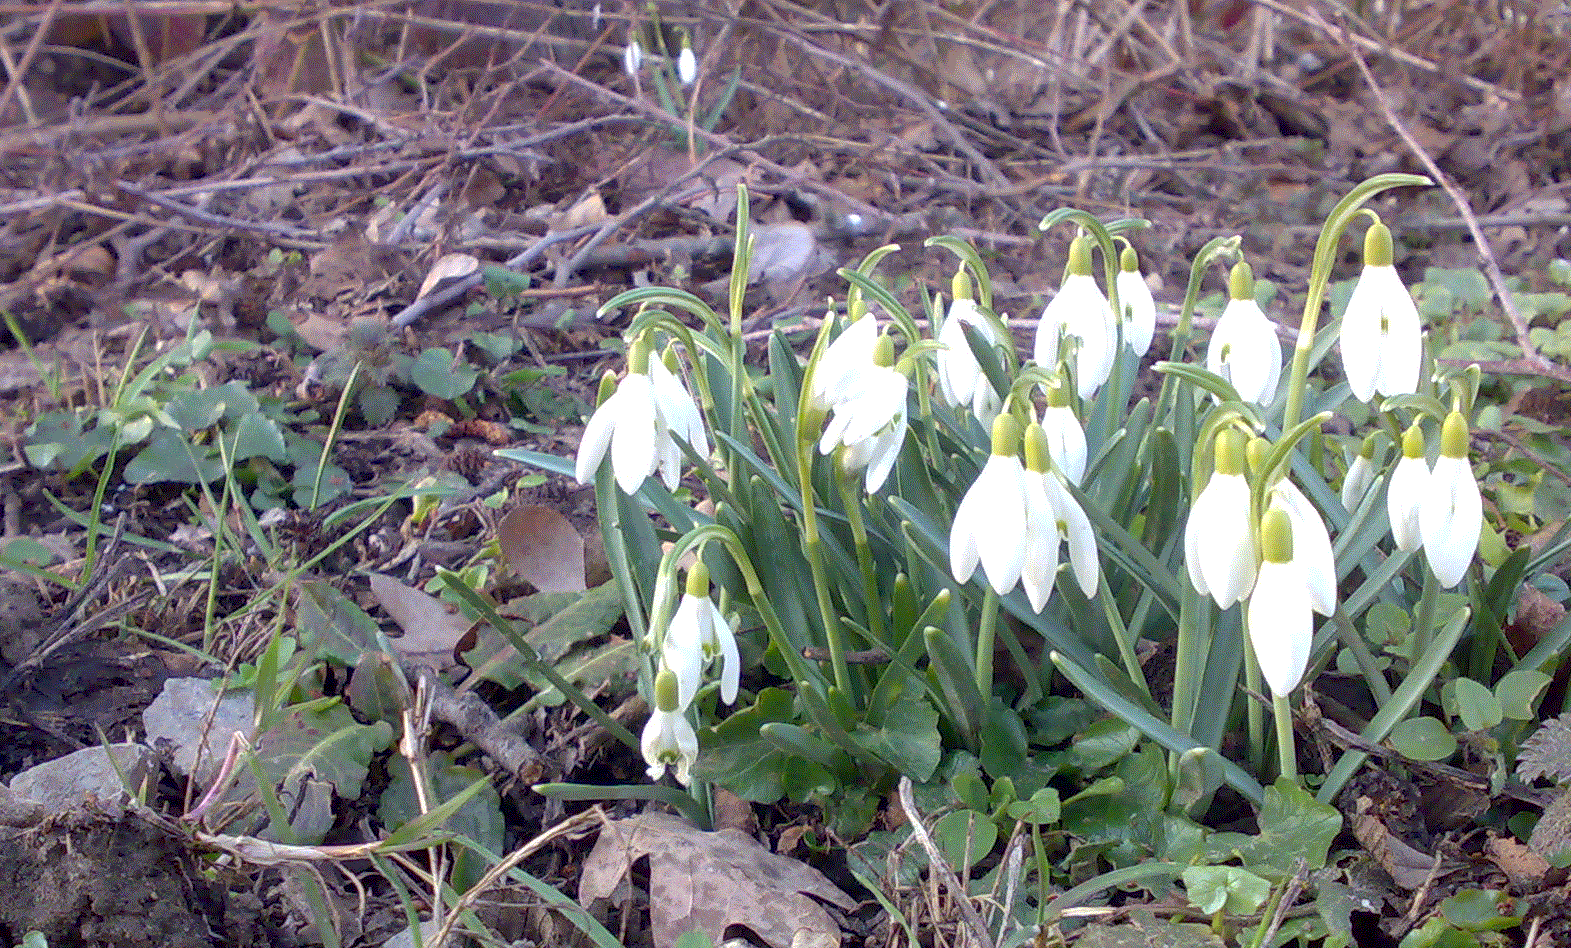 Photograph: Sad looking white flowers on a leaf-filled ground